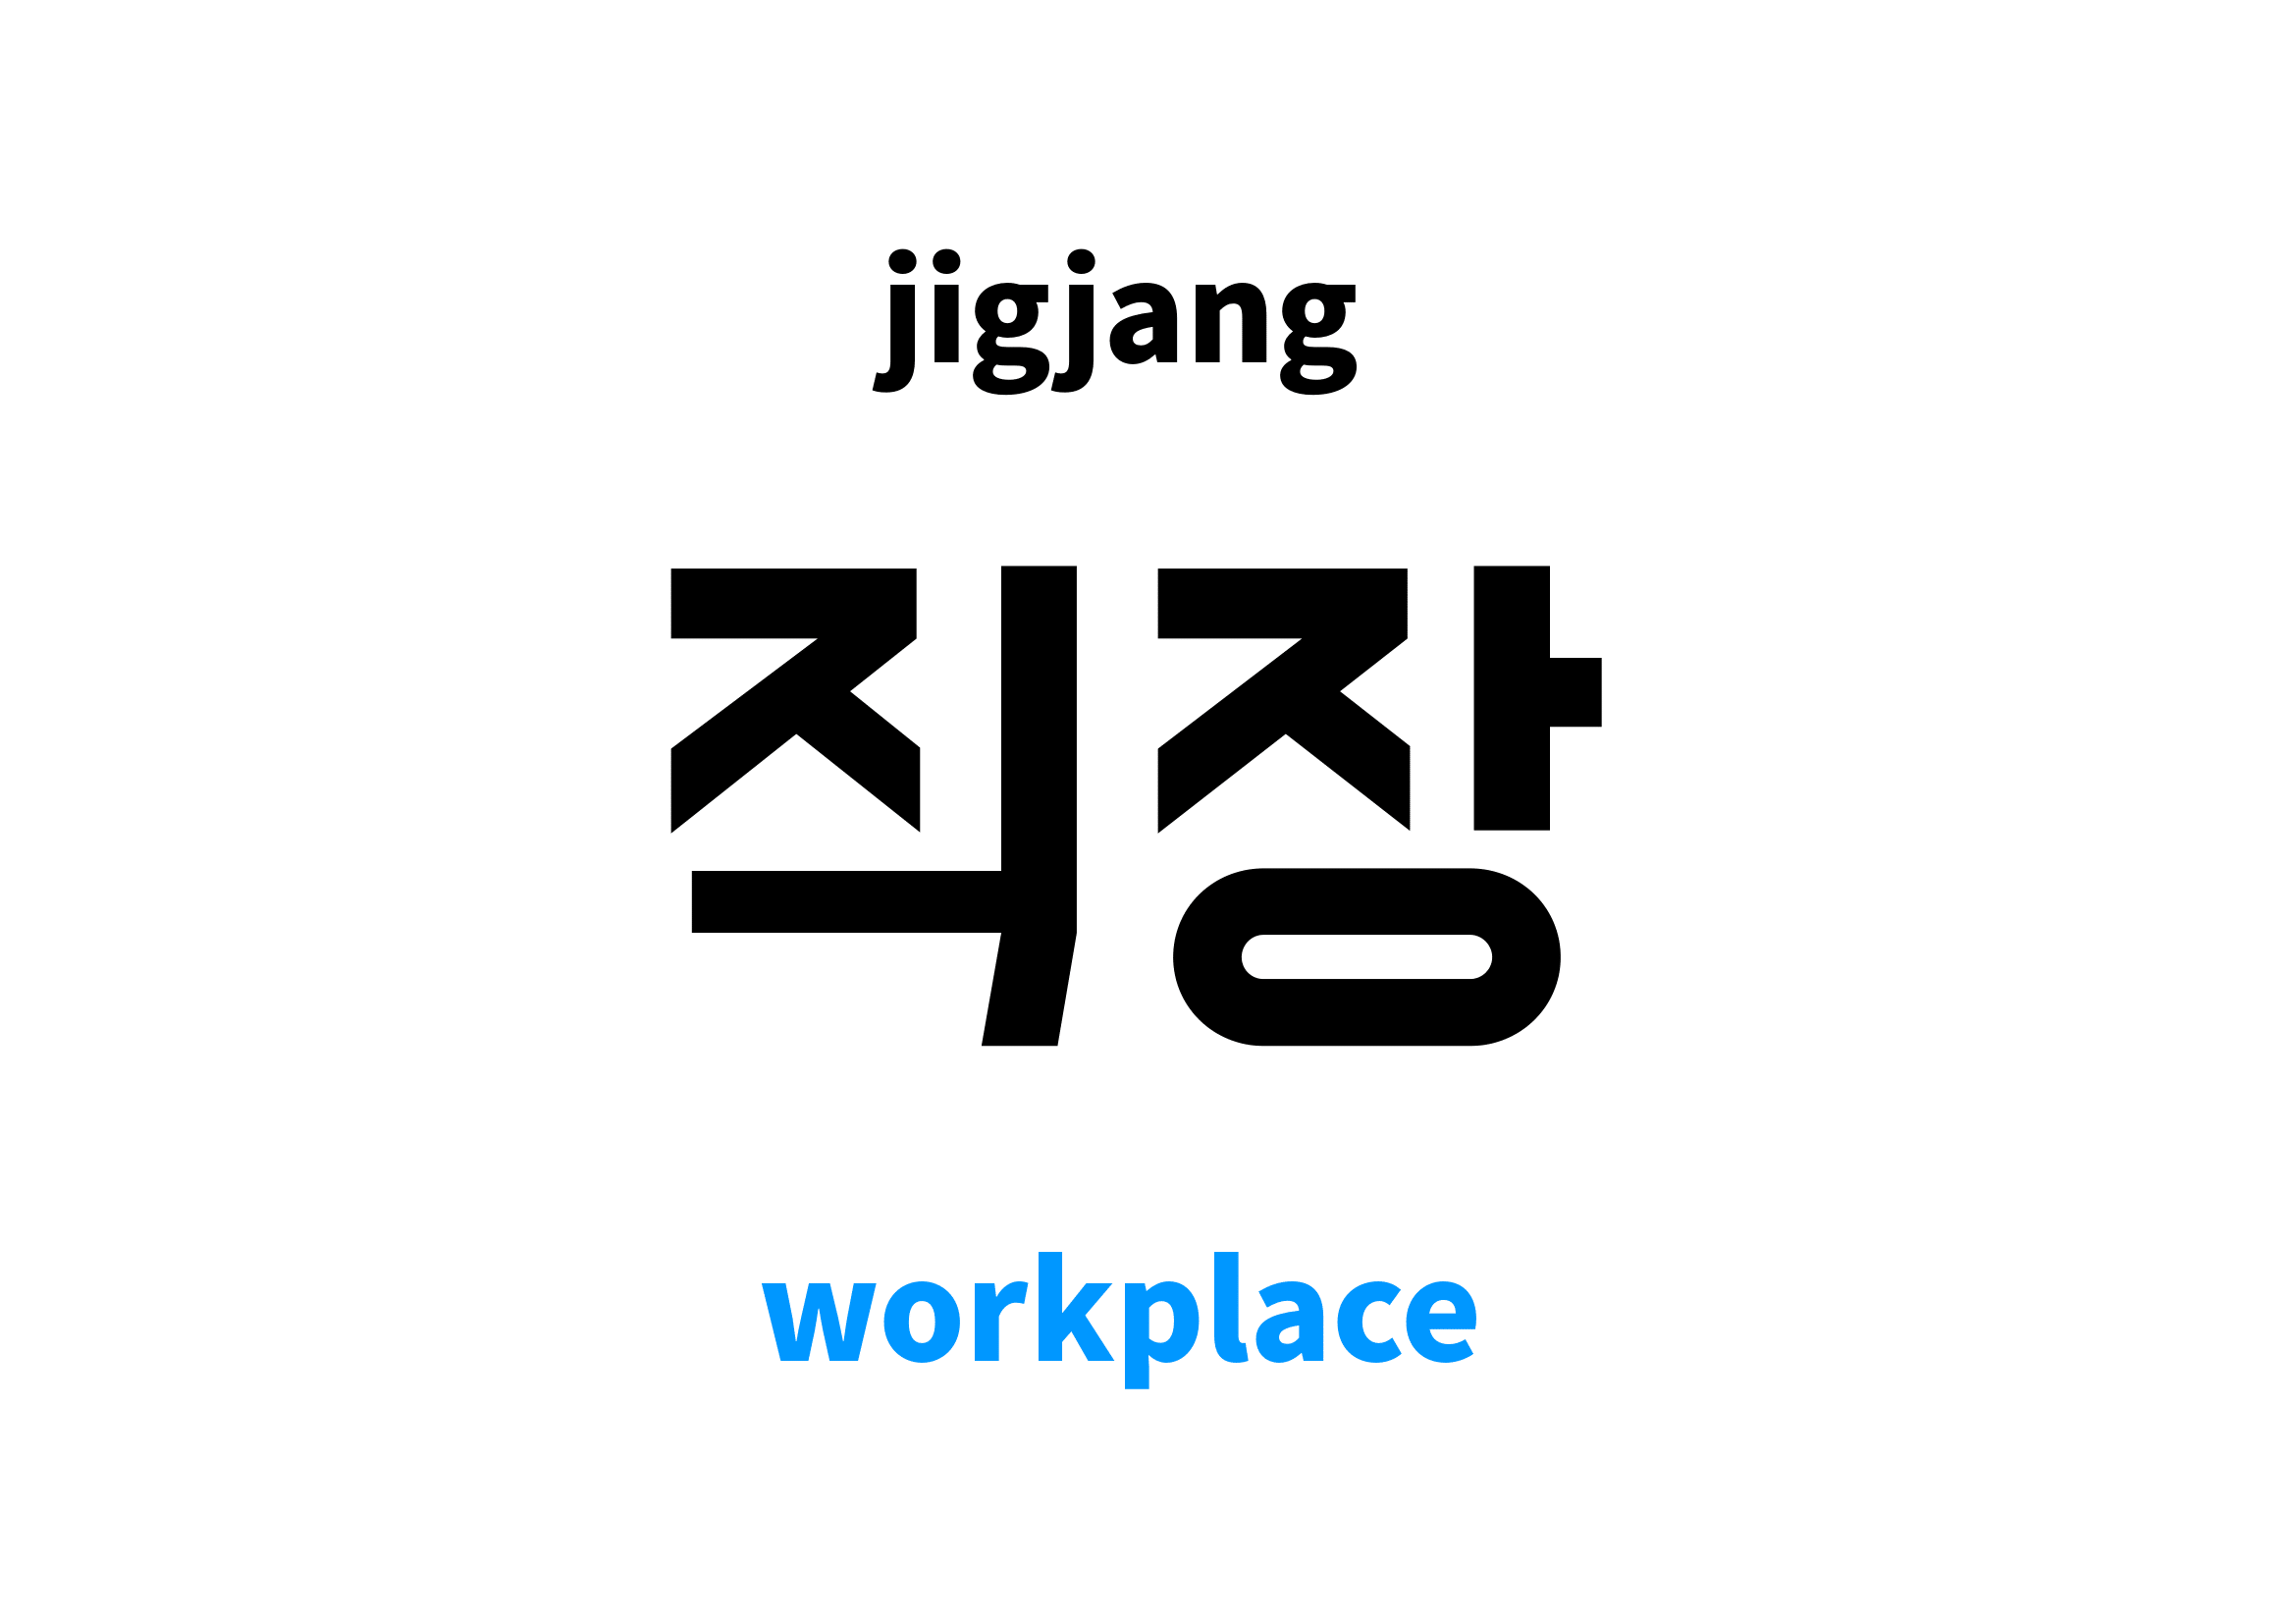 Workplace in Korean, 직장 meaning